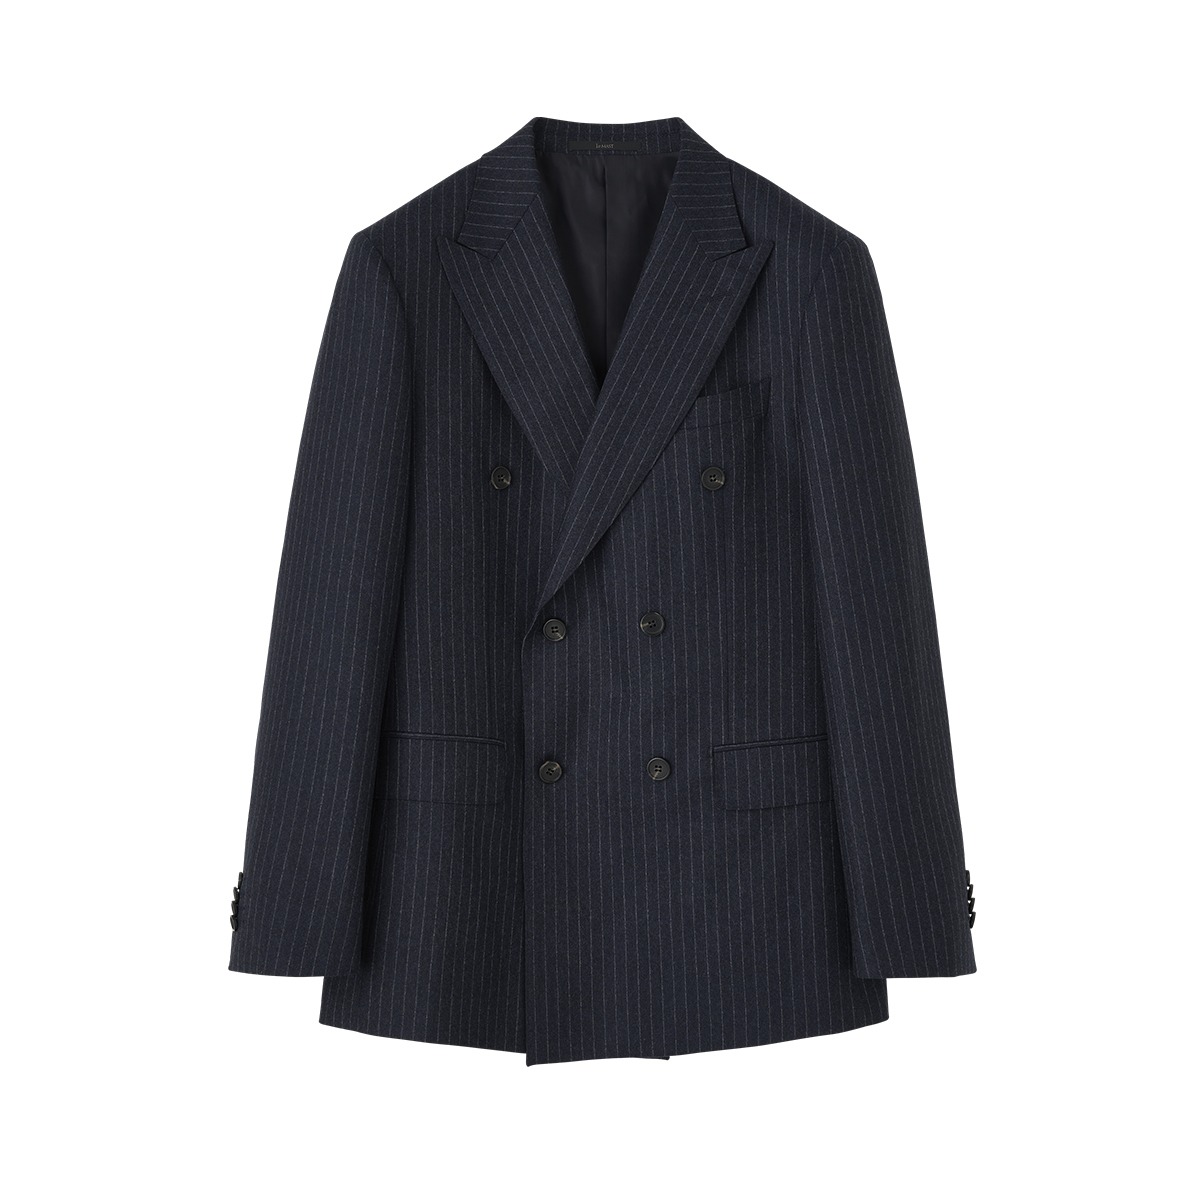 Navy Stripe Double Brested Suit